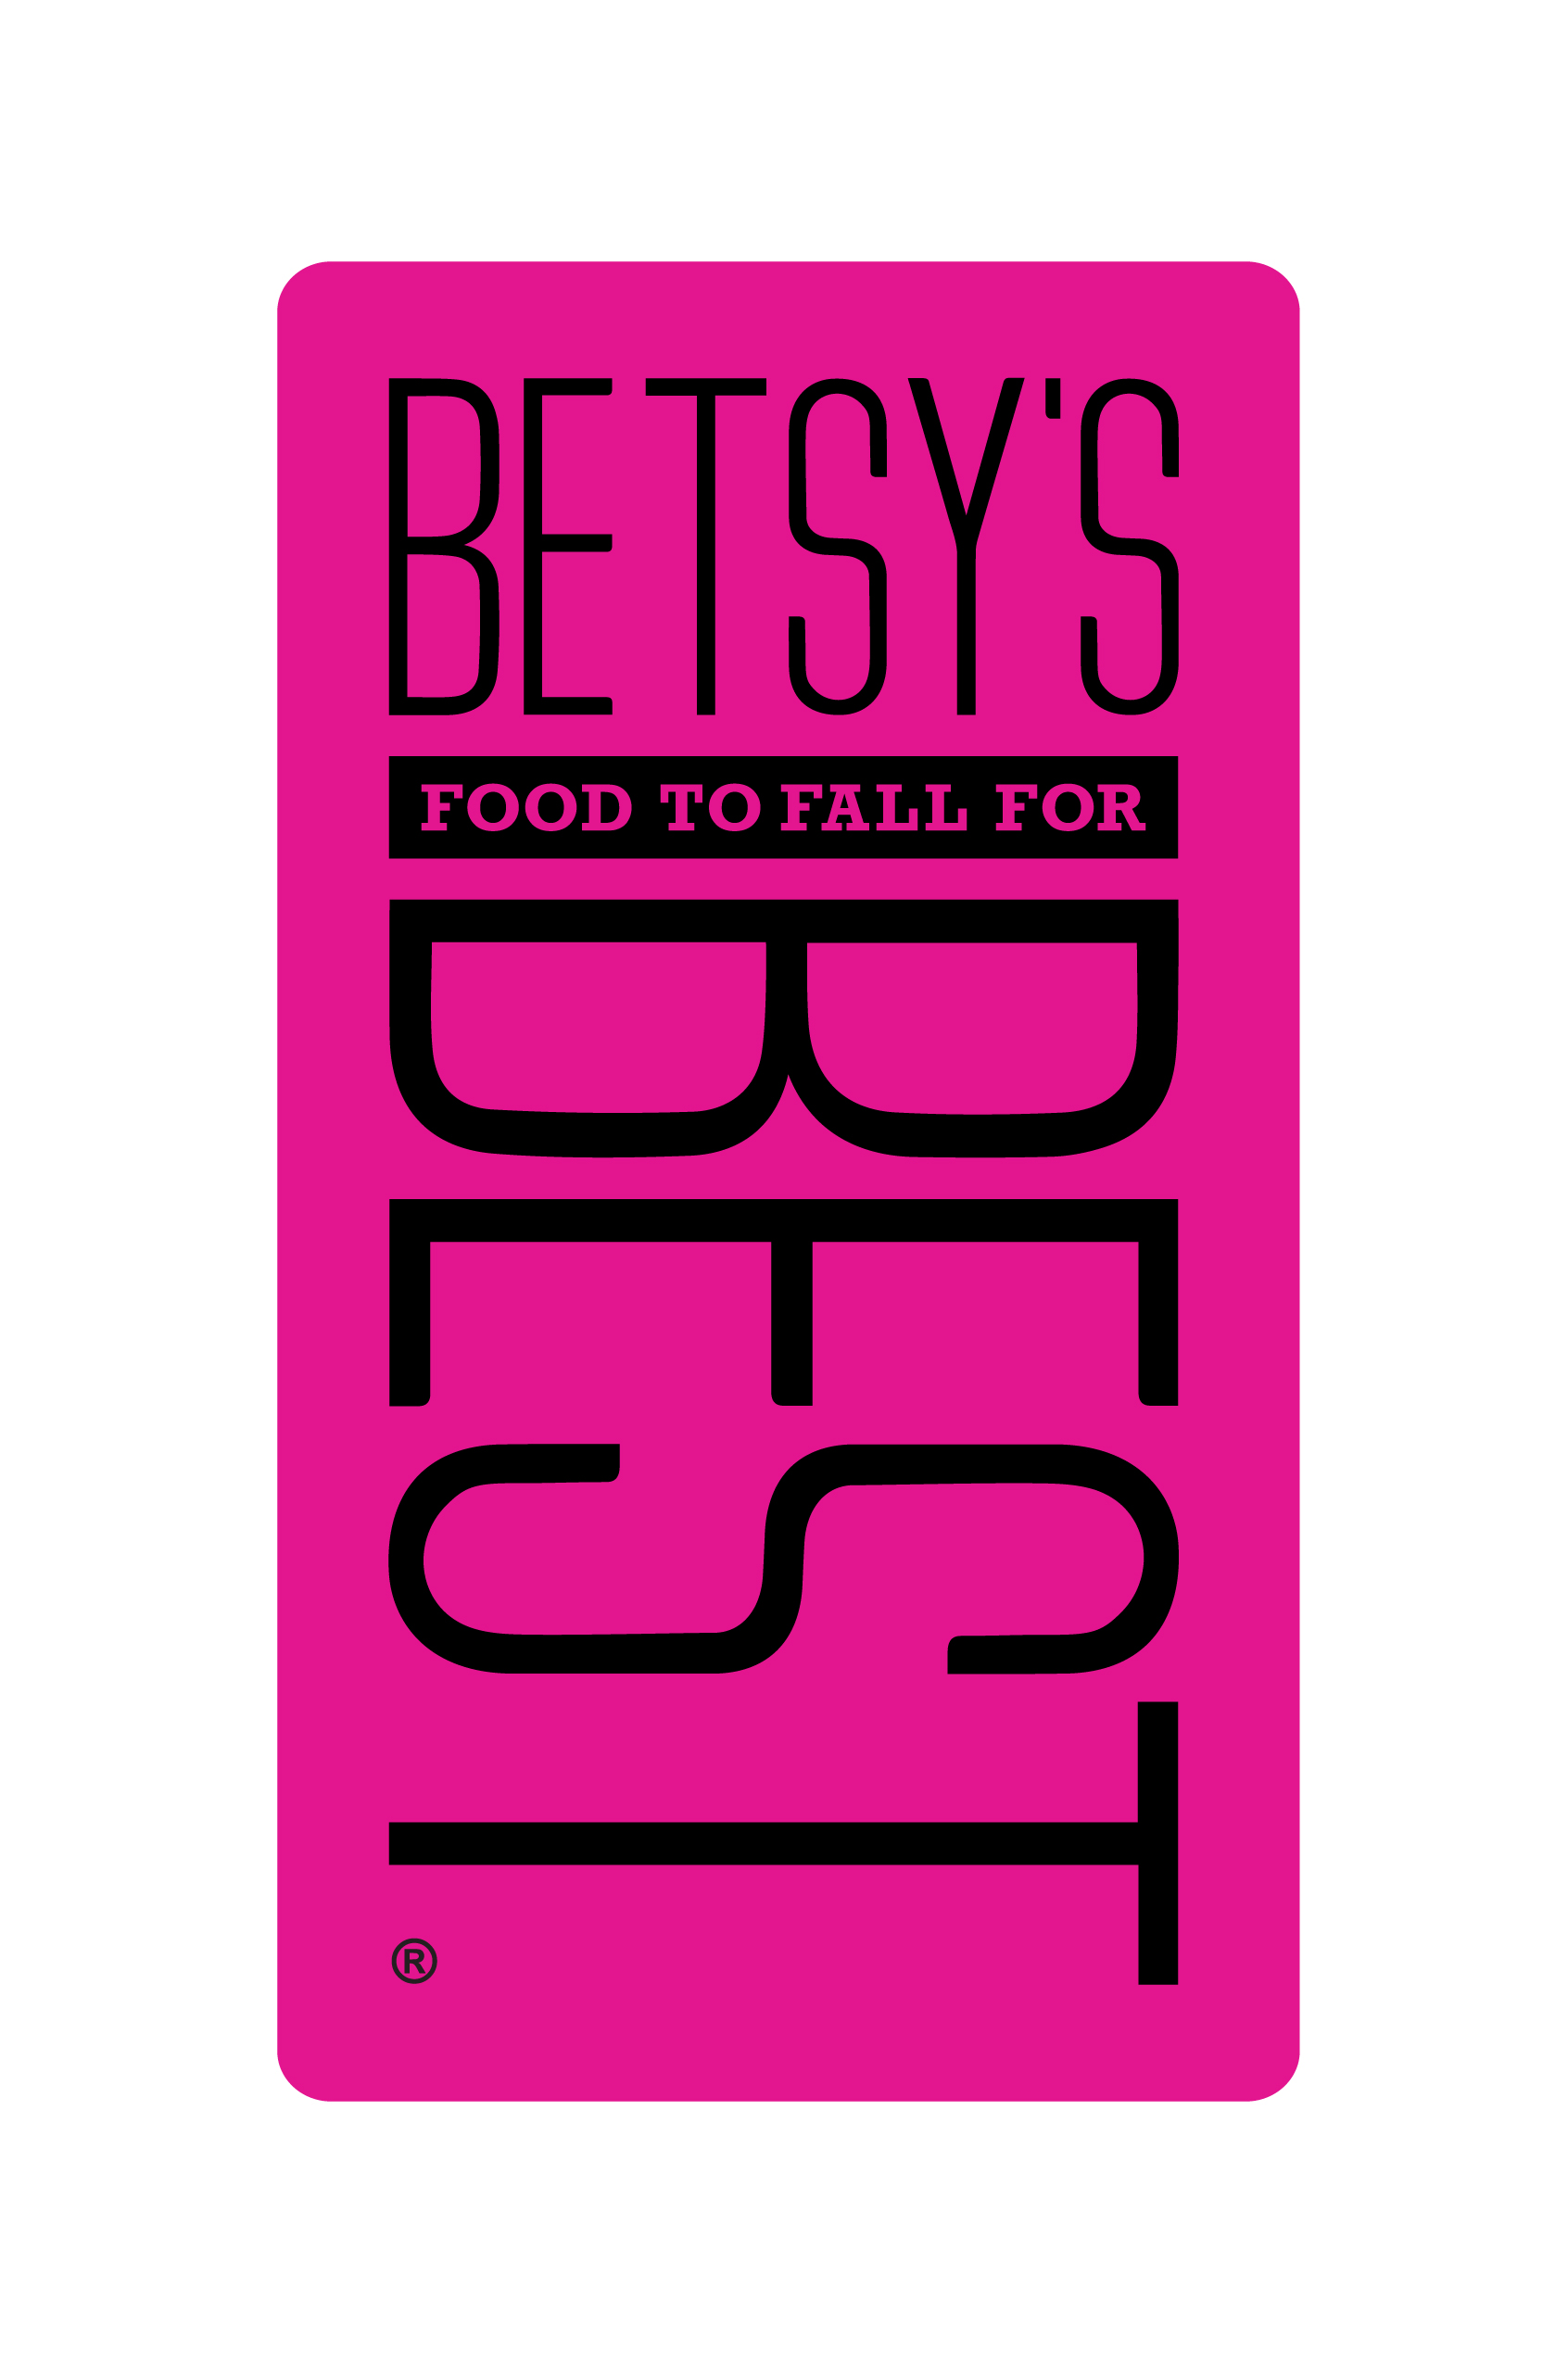 Betsy's Best® is available on BetsysBest.com and in all Florida Whole Foods Market locations.